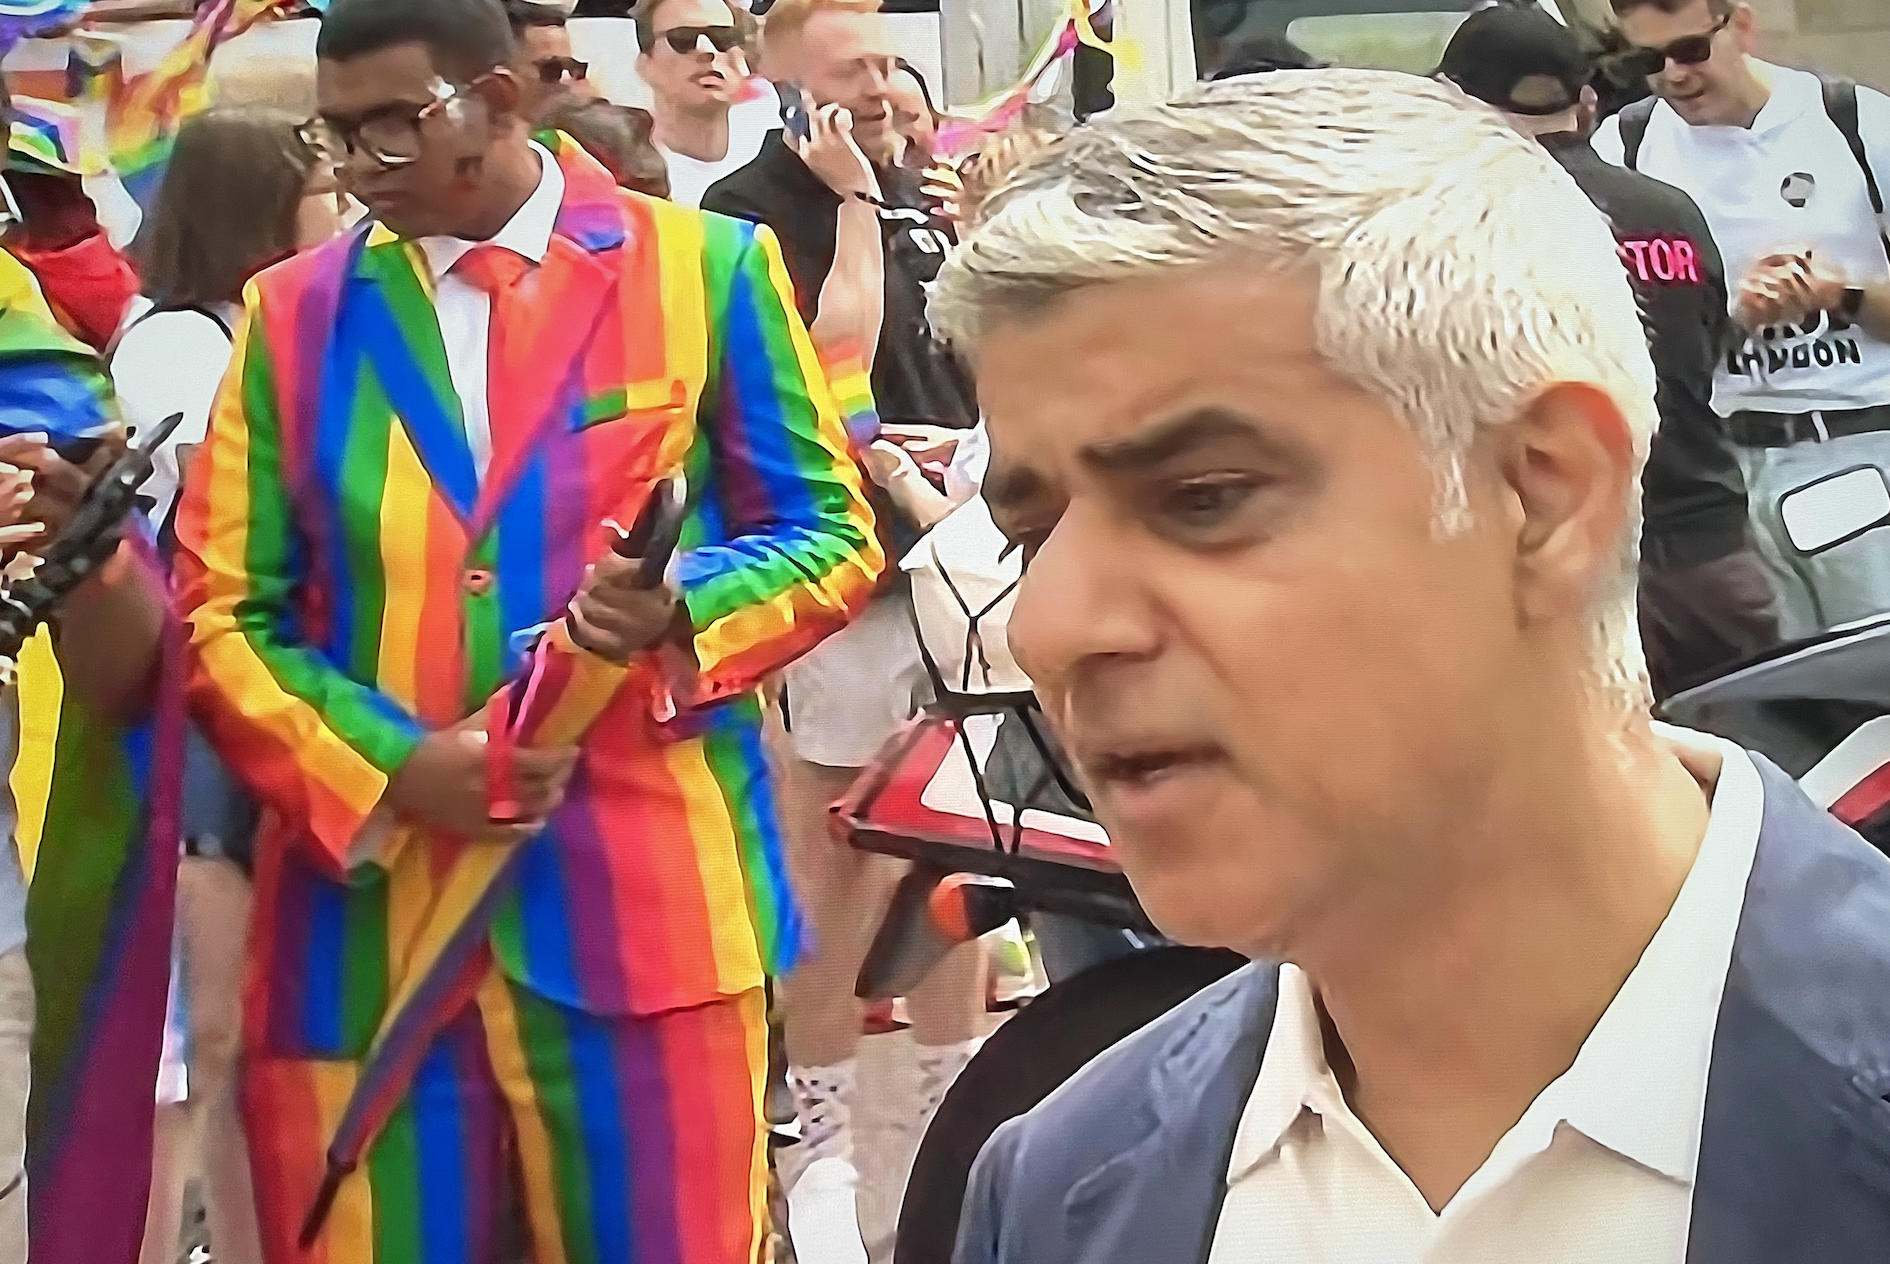 The Mayor of London said there was still a danger to the LGBT= community.